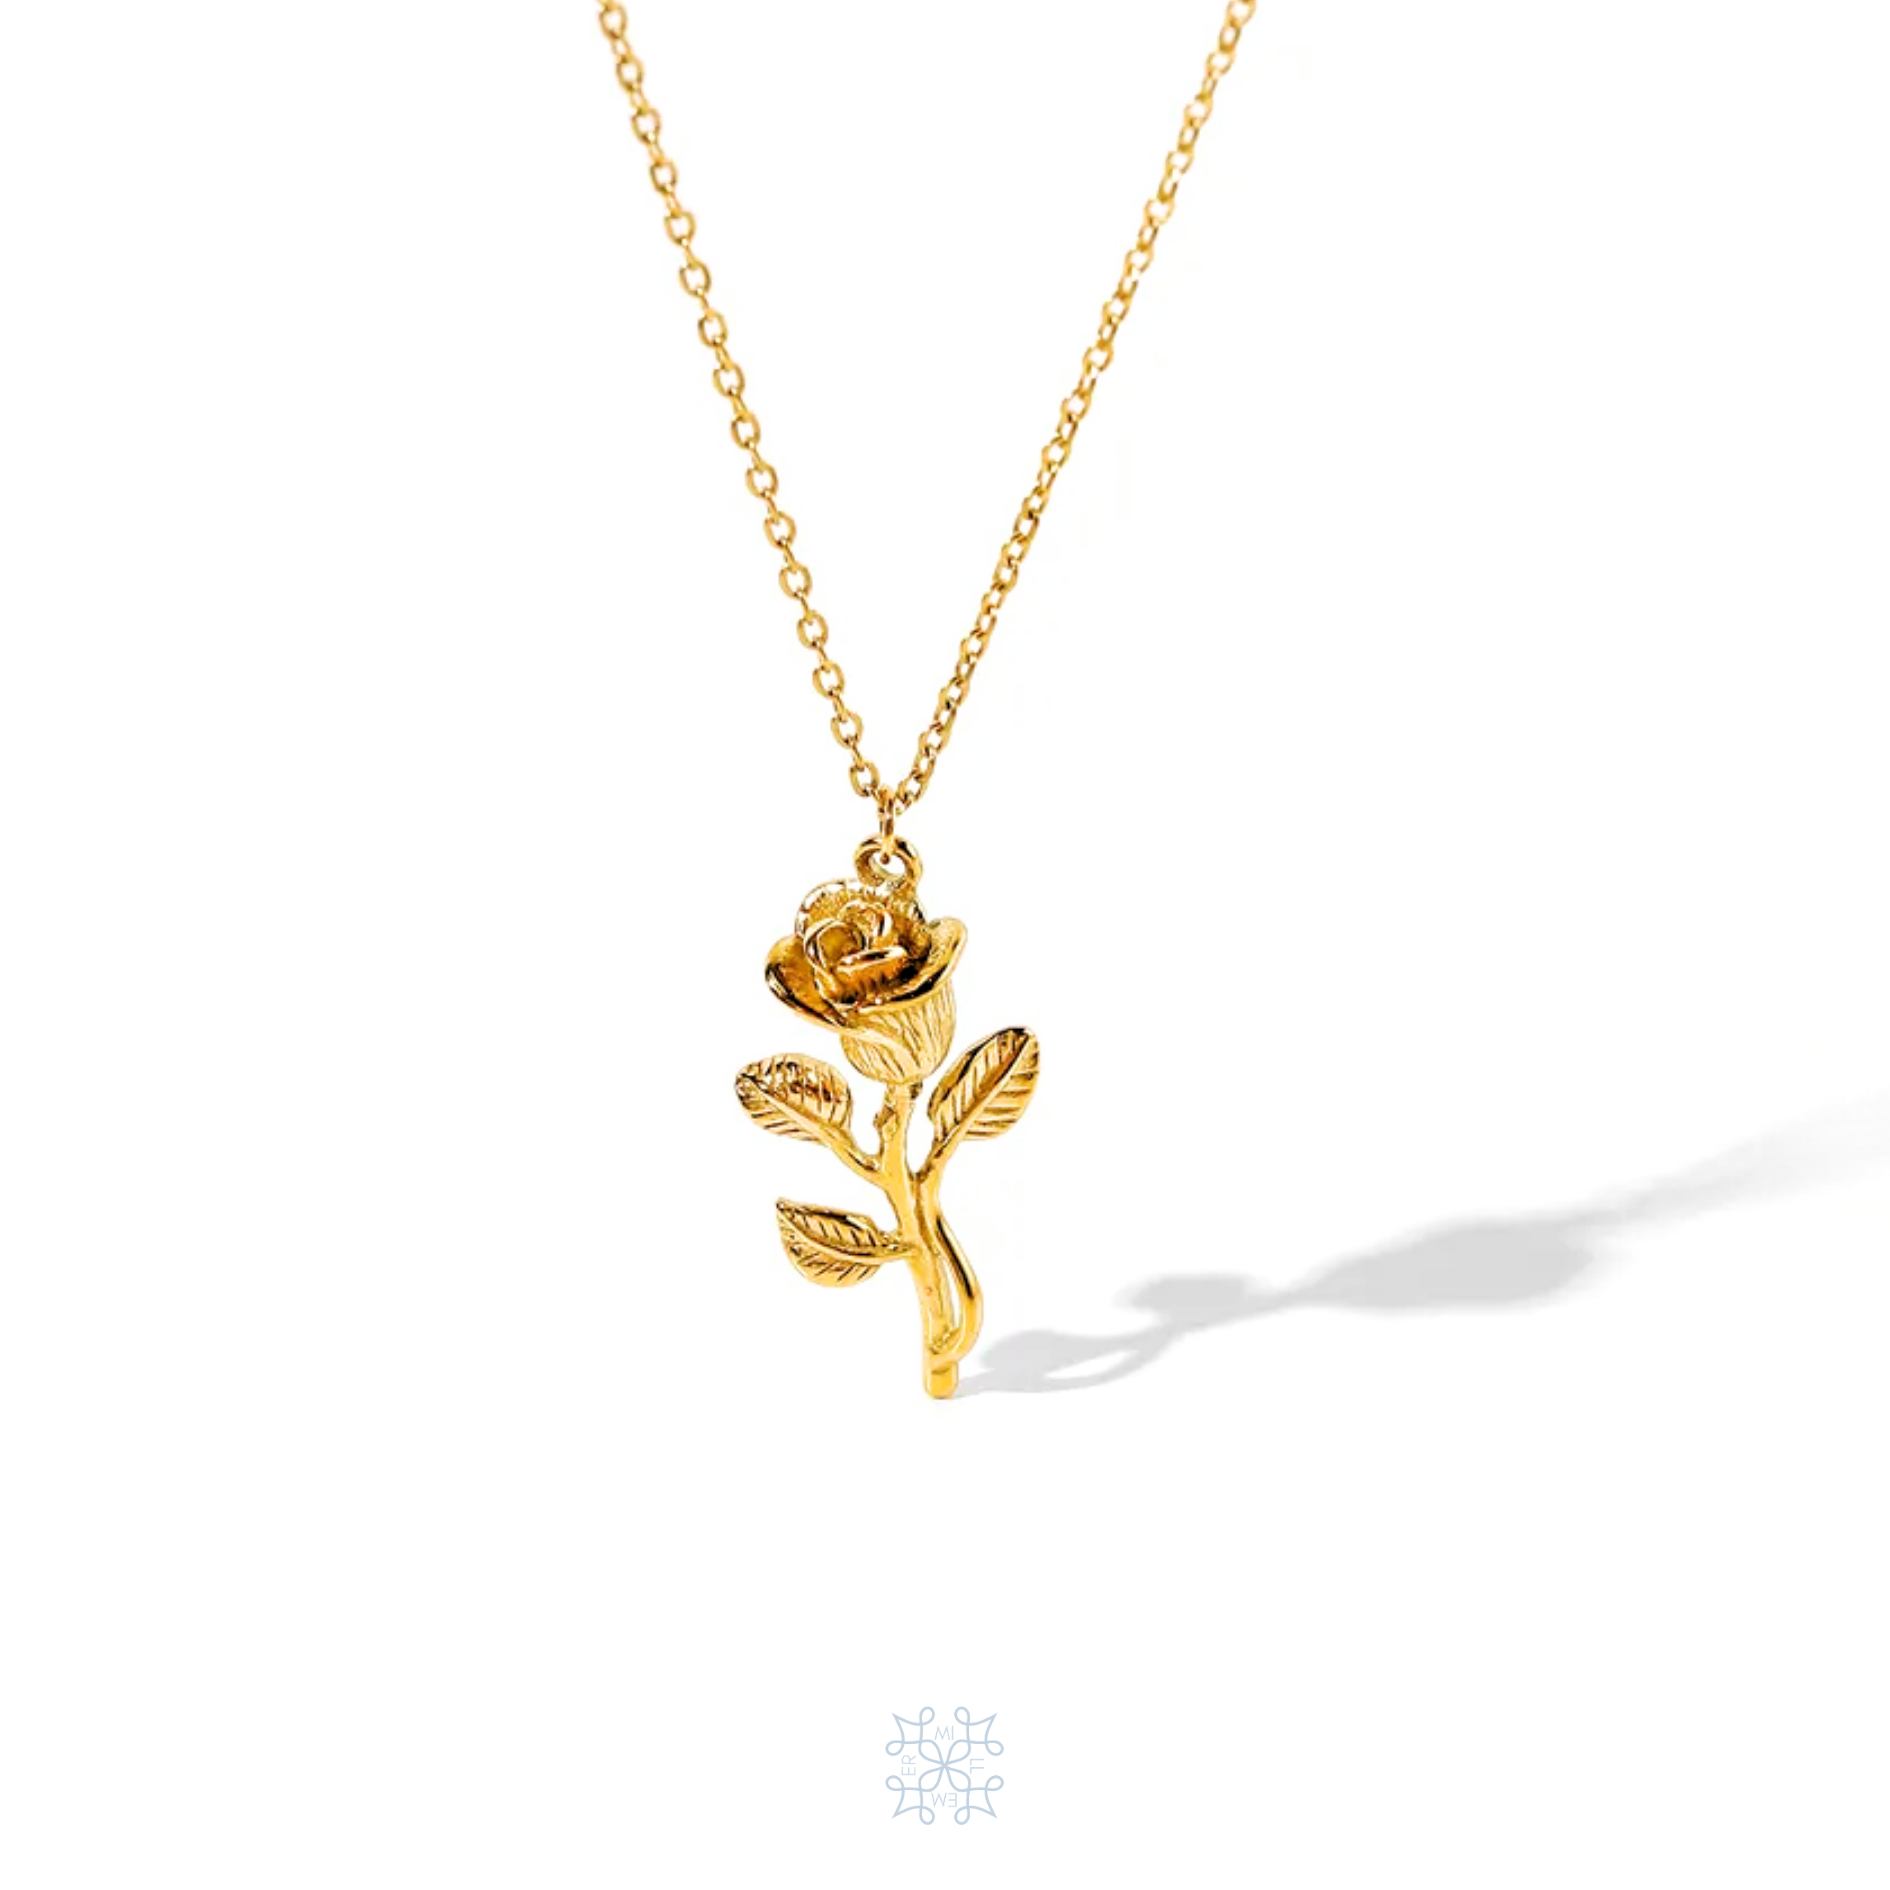 BELLE Rose Pendant Gold Necklace - Gold Necklace with gold chain and a pendant in the shape of a rose which hangs from its flower part with the tail down vertically